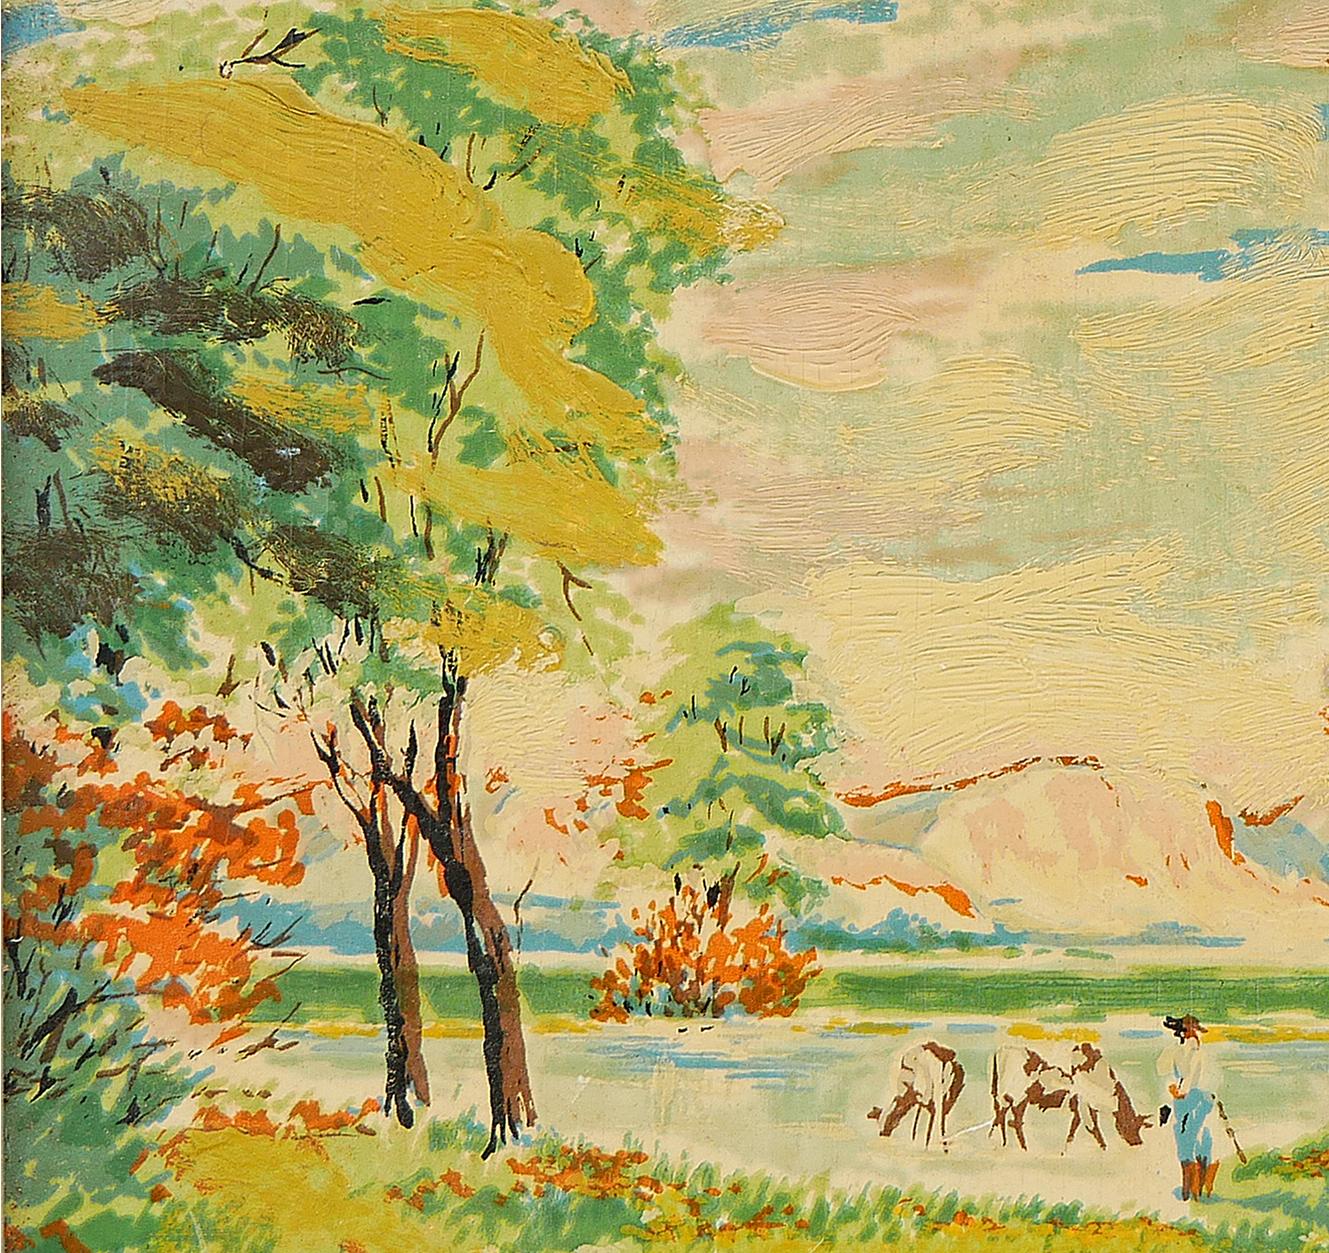 Yellow and Green-Toned Post Impressionist Belgian Countryside Landscape Painting 6